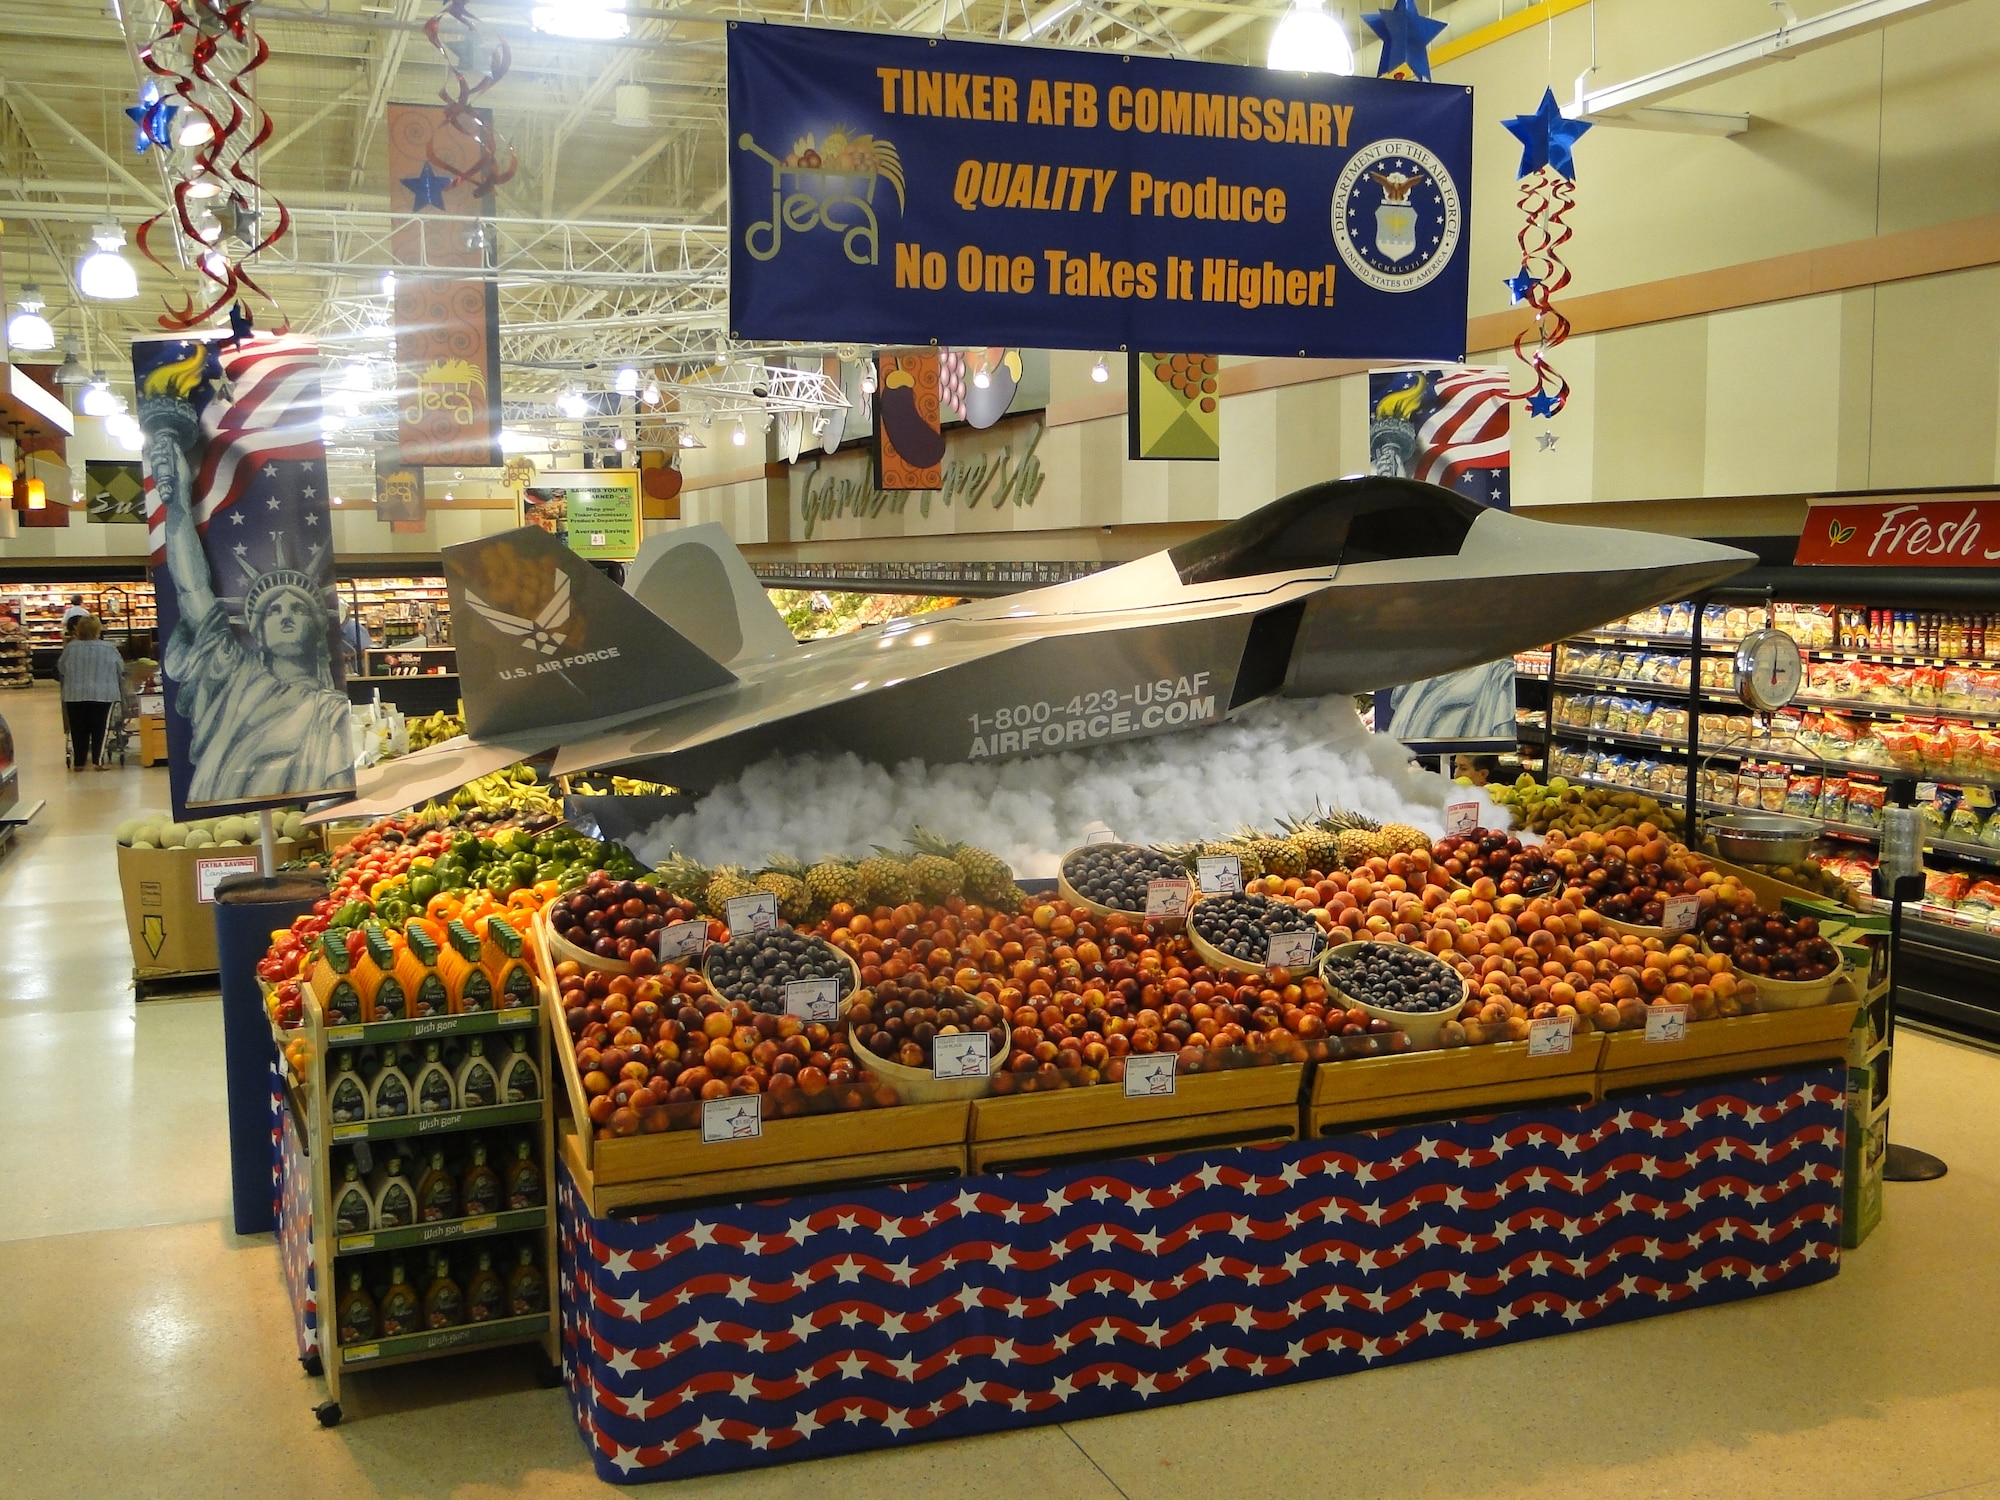 This F-22 Raptor advanced tactical fighter model, which is actually a go-cart, takes produce sky high at the commissary at Tinker Air Force Base, Okla. Tinker commissary managers won their second straight “best large U.S. store” award. Ten commissaries worldwide earned honors in 2010 during the 10th Annual Produce Merchandising Contest. The annual competition highlights the Defense Commissary Agency’s role as nutritional leader for the Department of Defense.  Winning stores excelled in quality and team performance in areas such as creative displays, customer education events and increased produce sales. (DeCA photo/Dennis Messner)